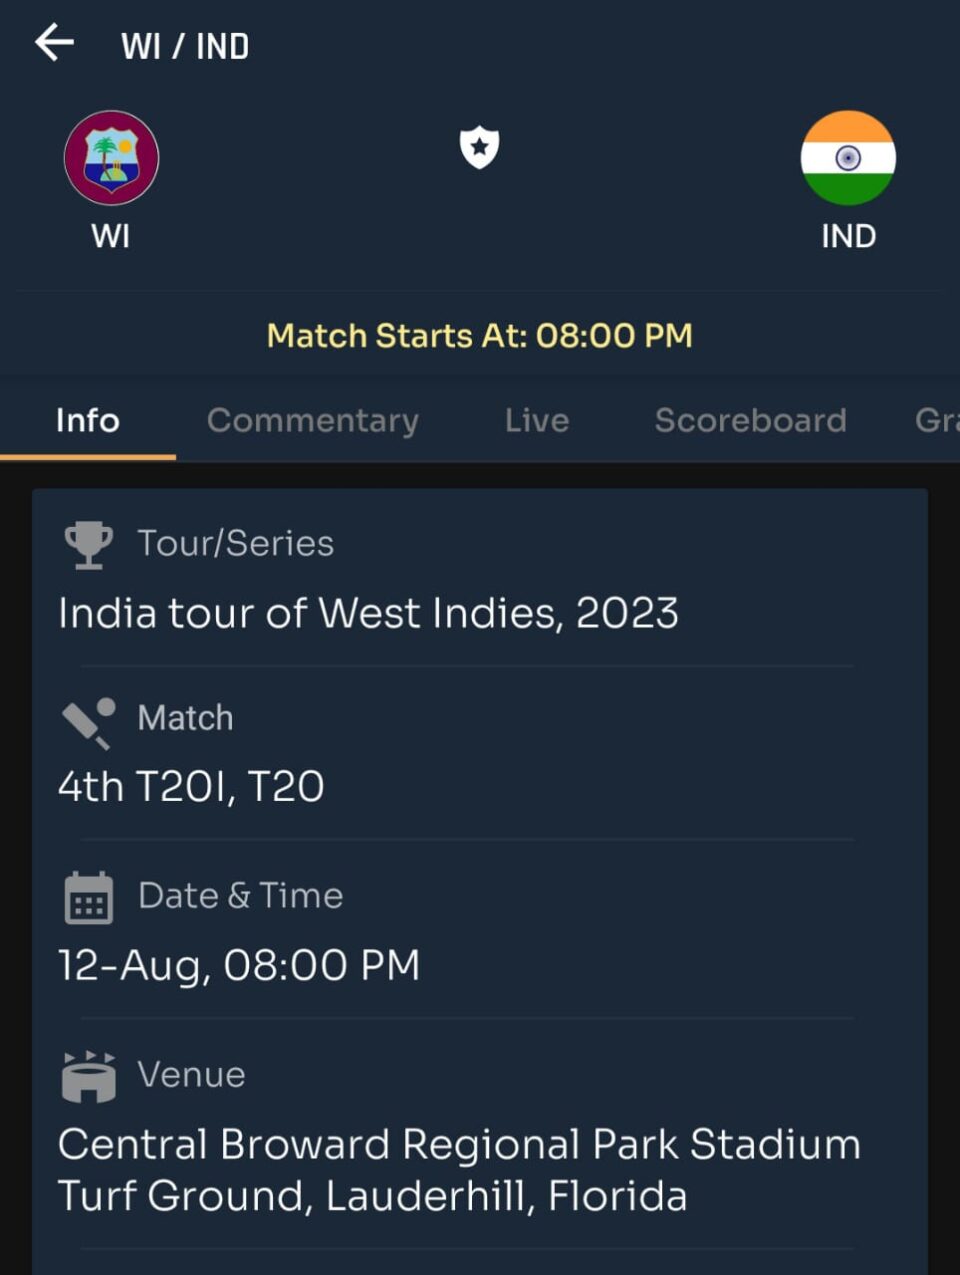 IND vs WI 4rd T20 Today Match Prediction: Toss Analysis, Pitch & Weather Report